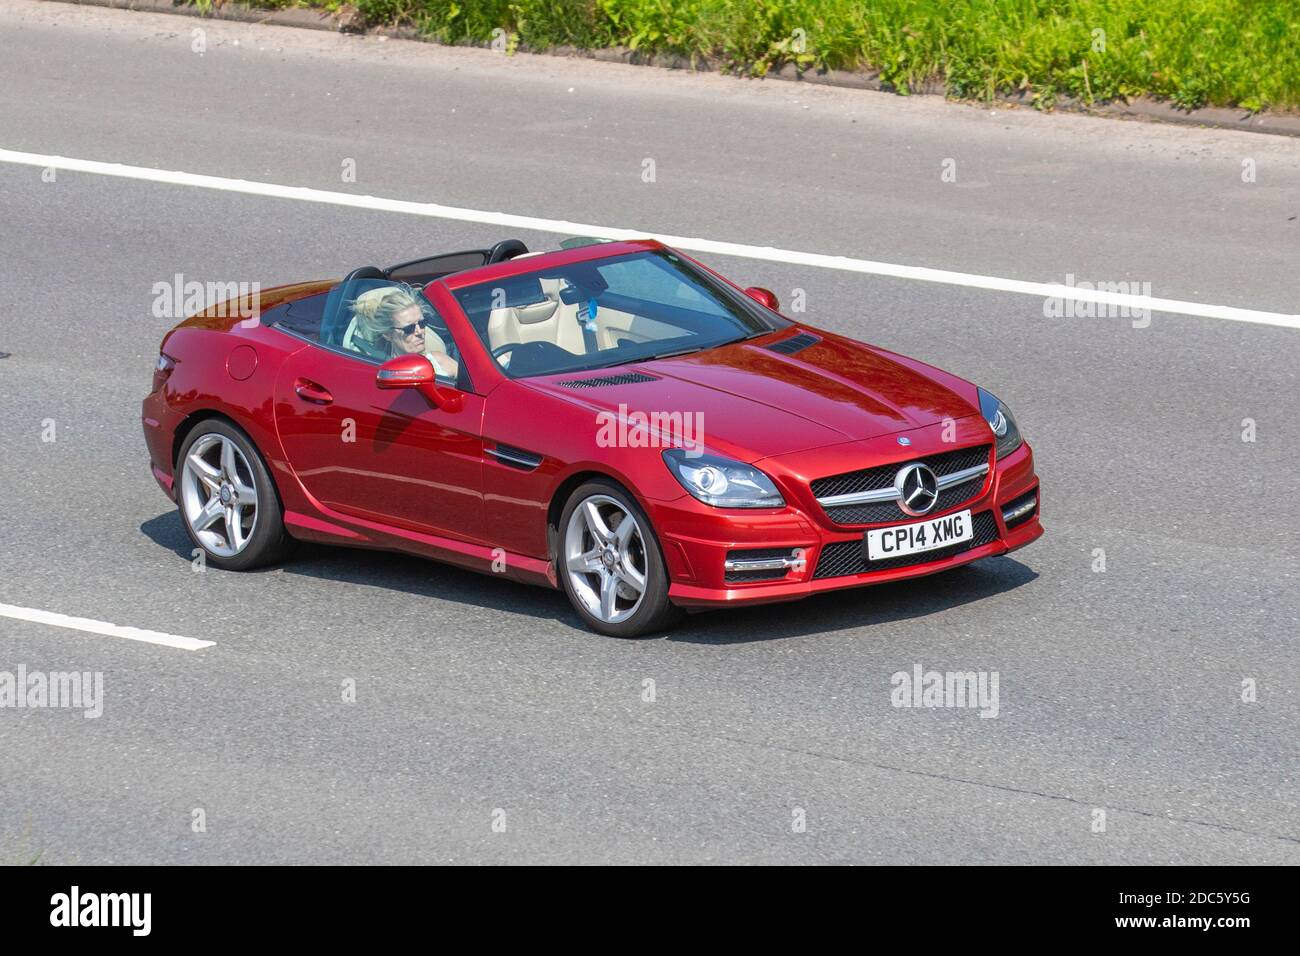 2008 silver Mercedes SLK 200 Kompressor Auto: Vehicular traffic moving  vehicles, convertible, convertibles soft-top, open topped roadster,  cabriolets, drop-tops, cars driving vehicle on UK roads, motors, motoring  on the M61 motorway highway